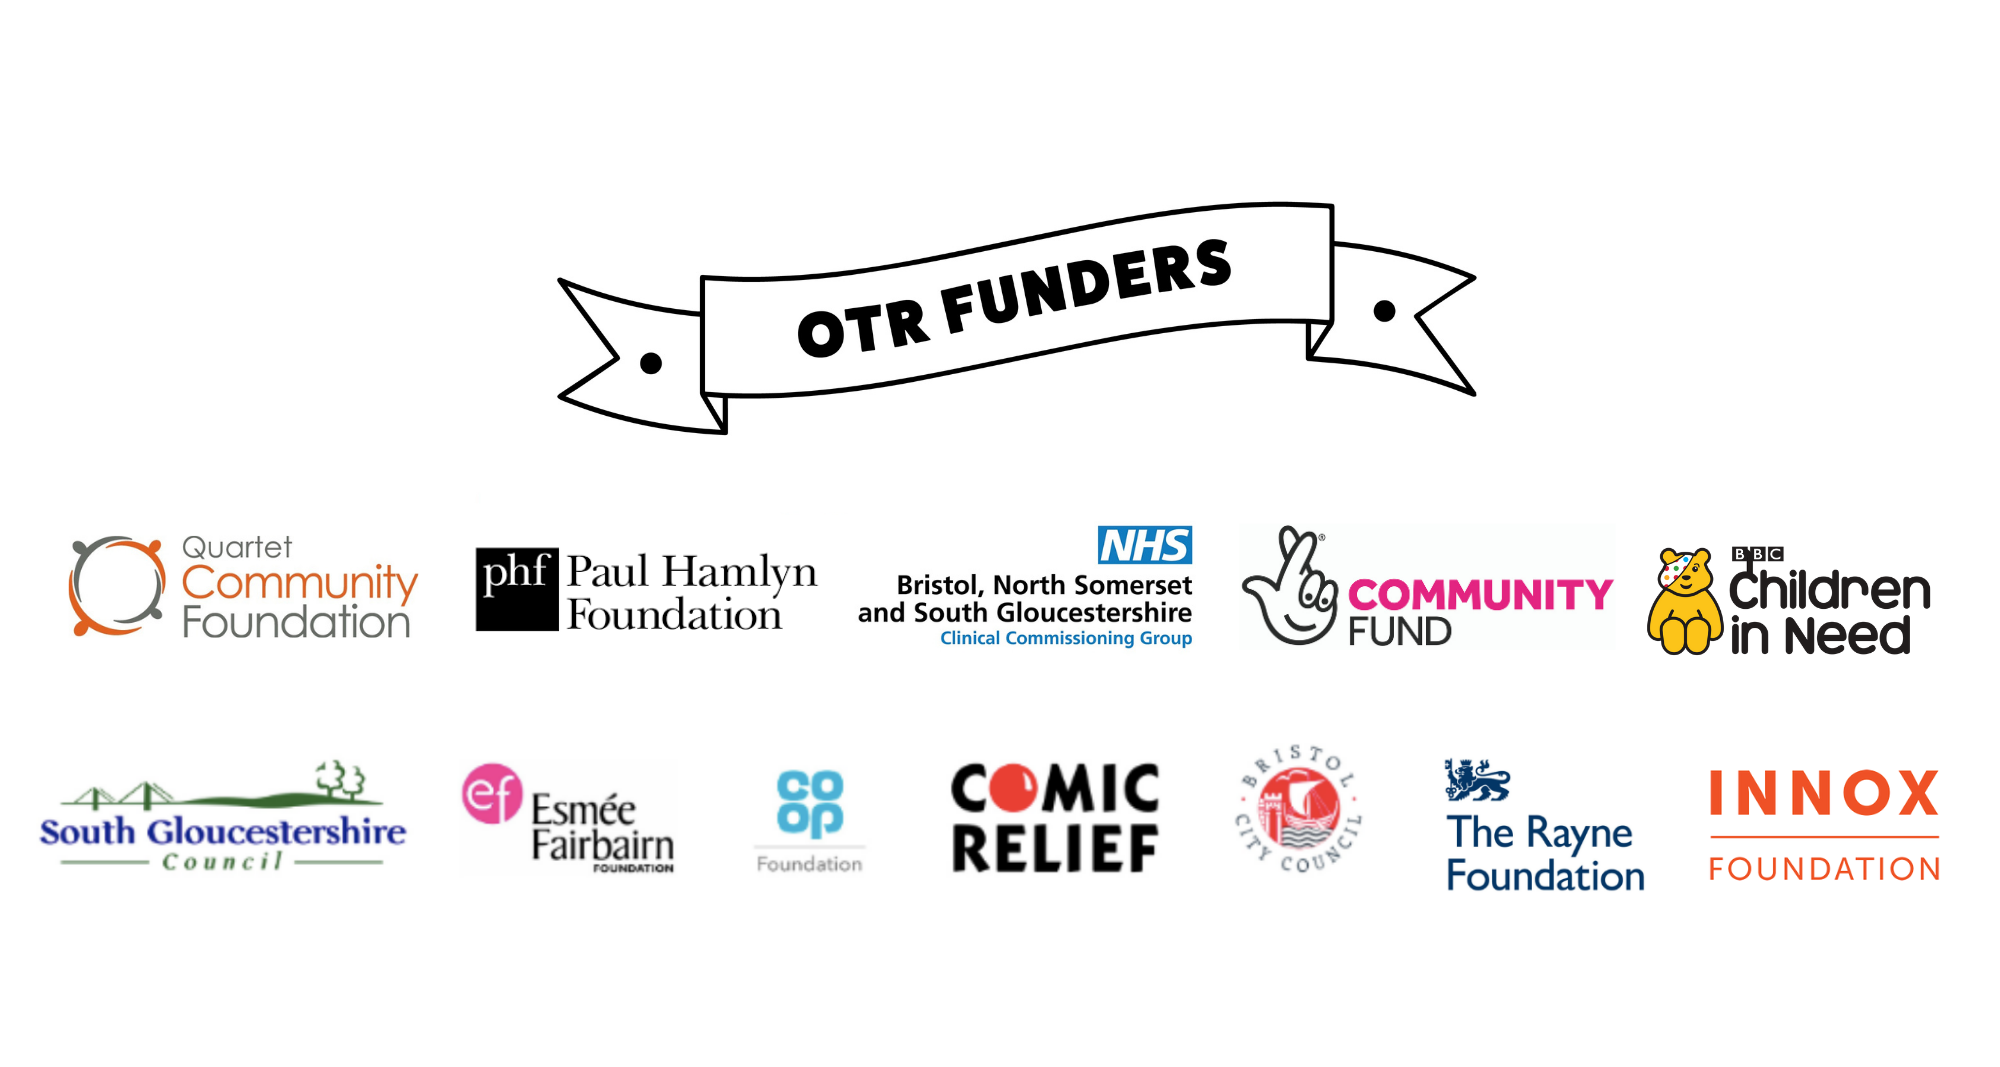 Big thanks to our funders